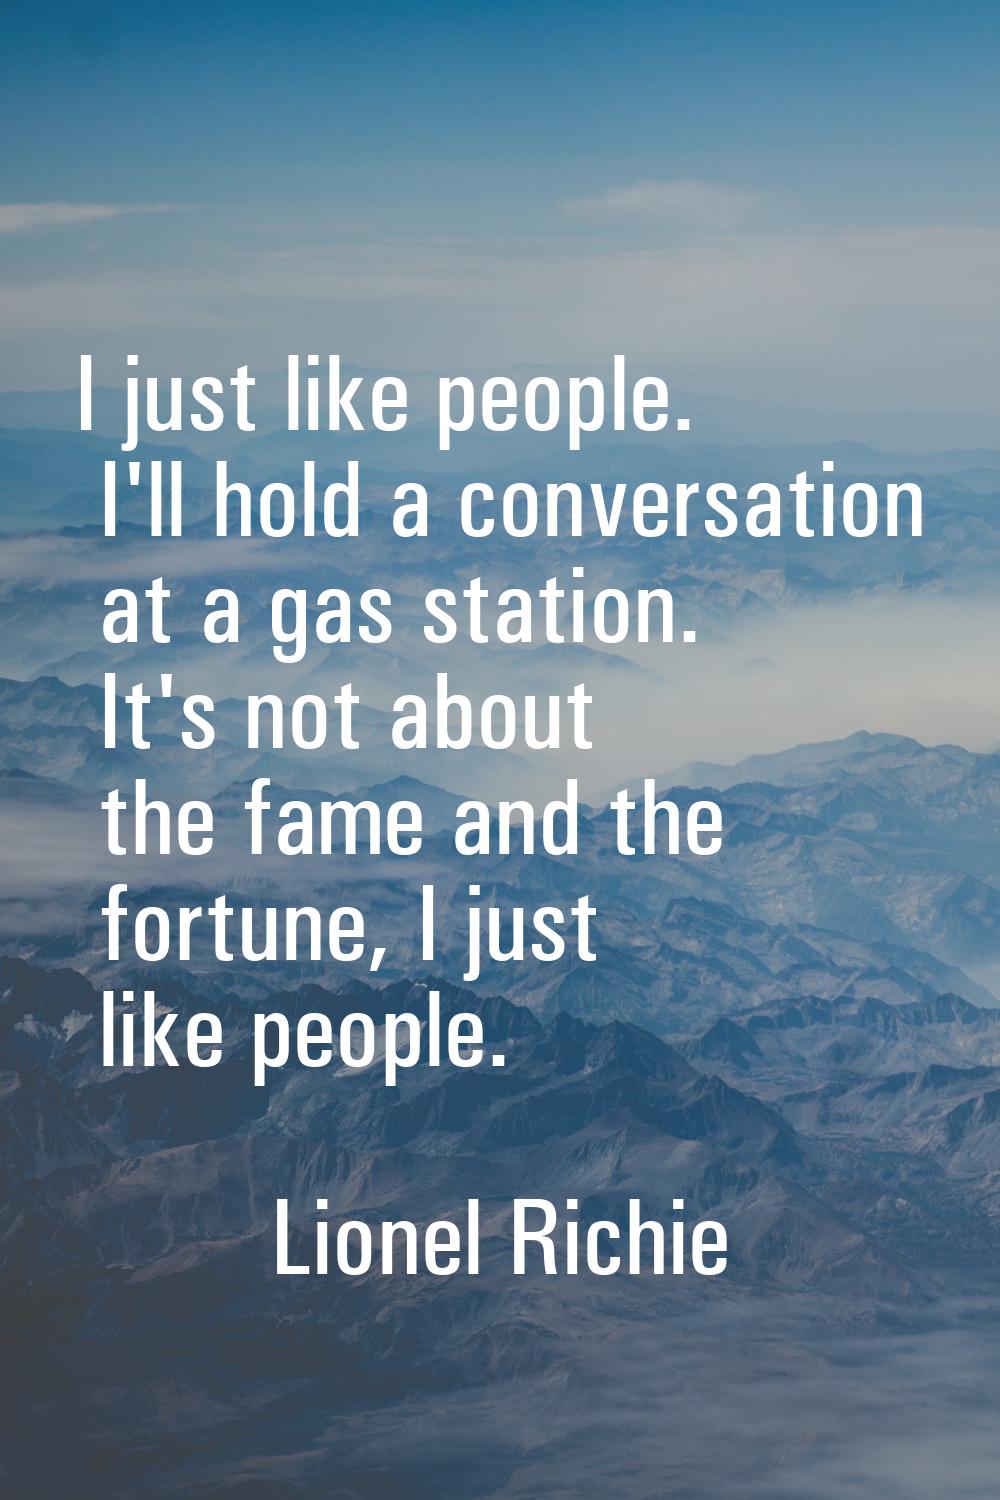 I just like people. I'll hold a conversation at a gas station. It's not about the fame and the fort